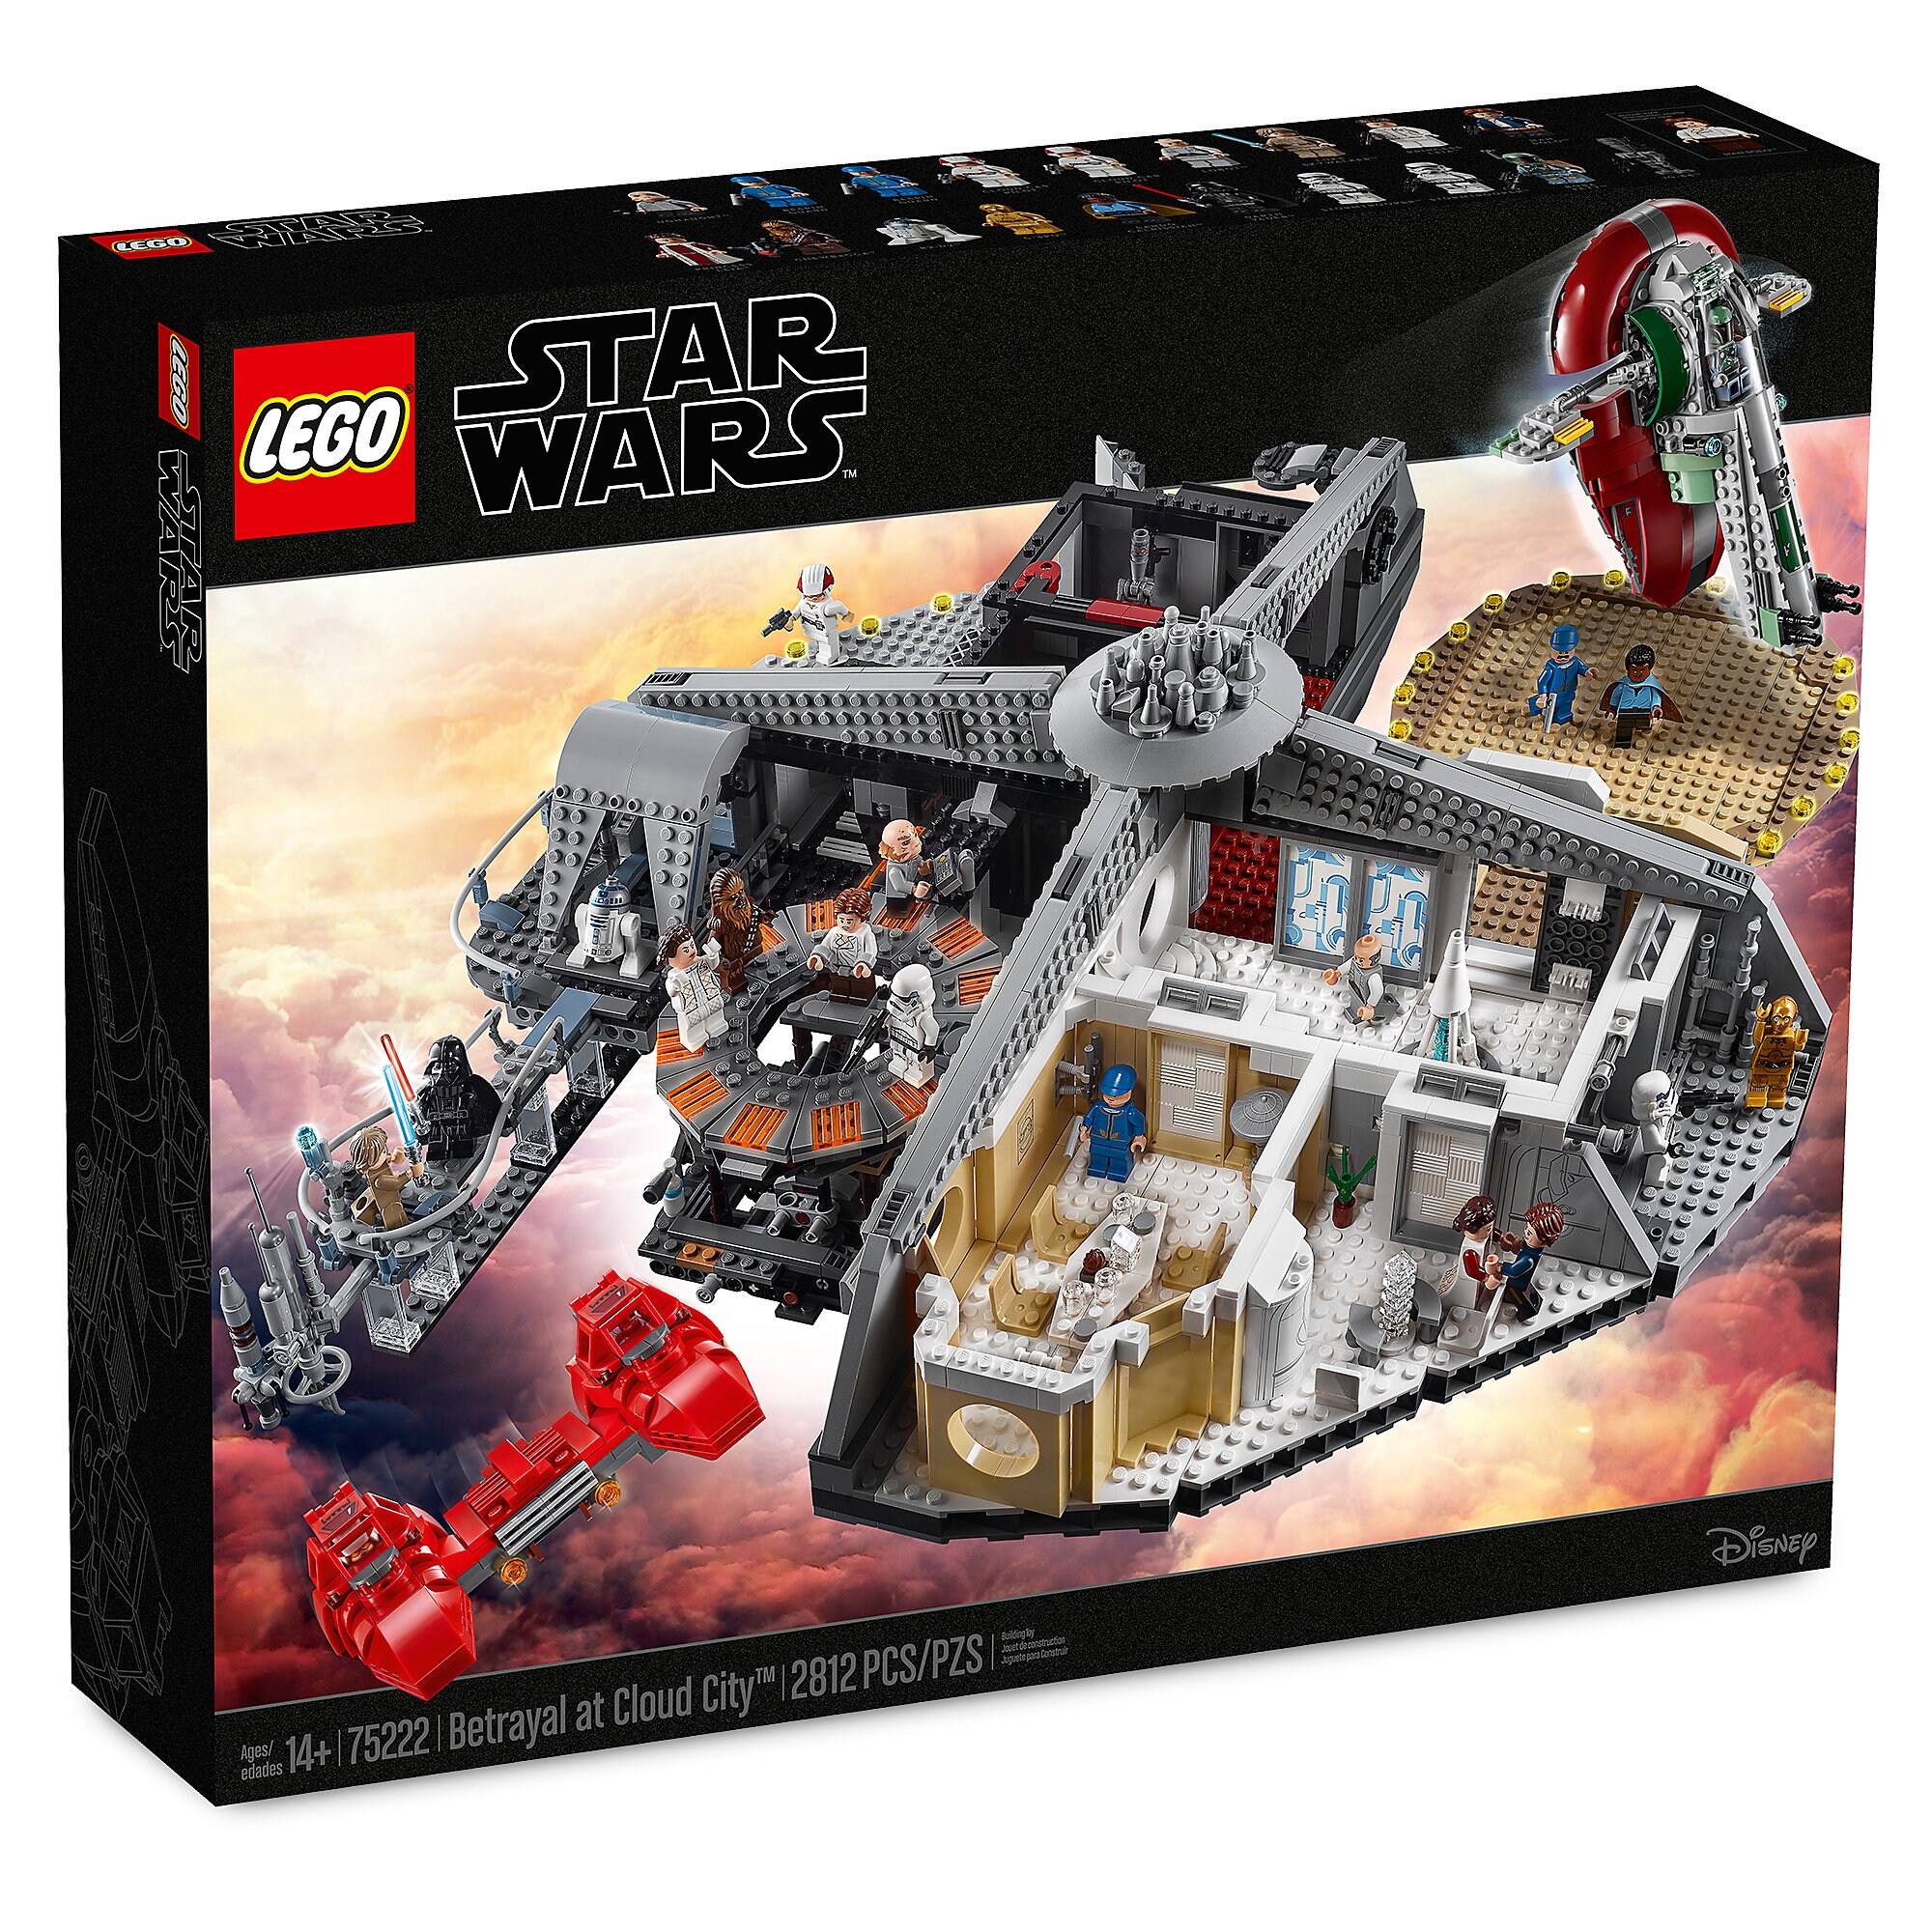 betrayal-at-cloud-city-playset-by-lego-star-wars-the-empire-strikes-back-is-now-available